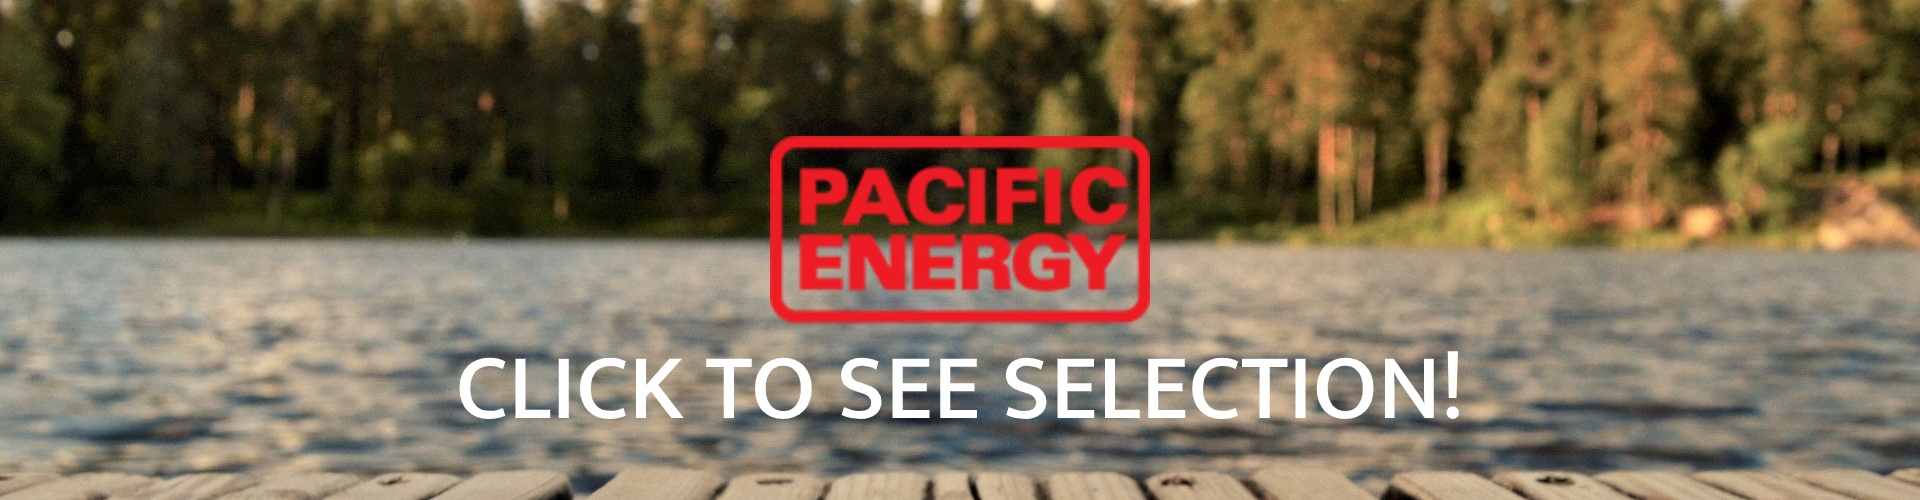 Pacific Energy Wood Stove Banner